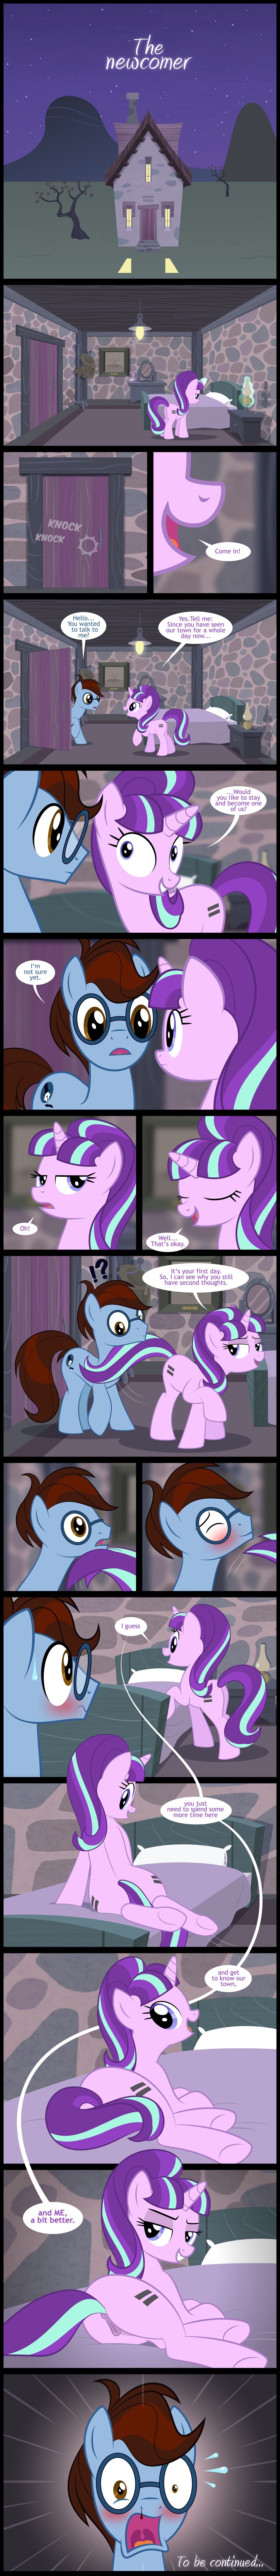 [Culu-Bluebeaver] The Newcomer (My Little Pony: Friendship is Magic) 1